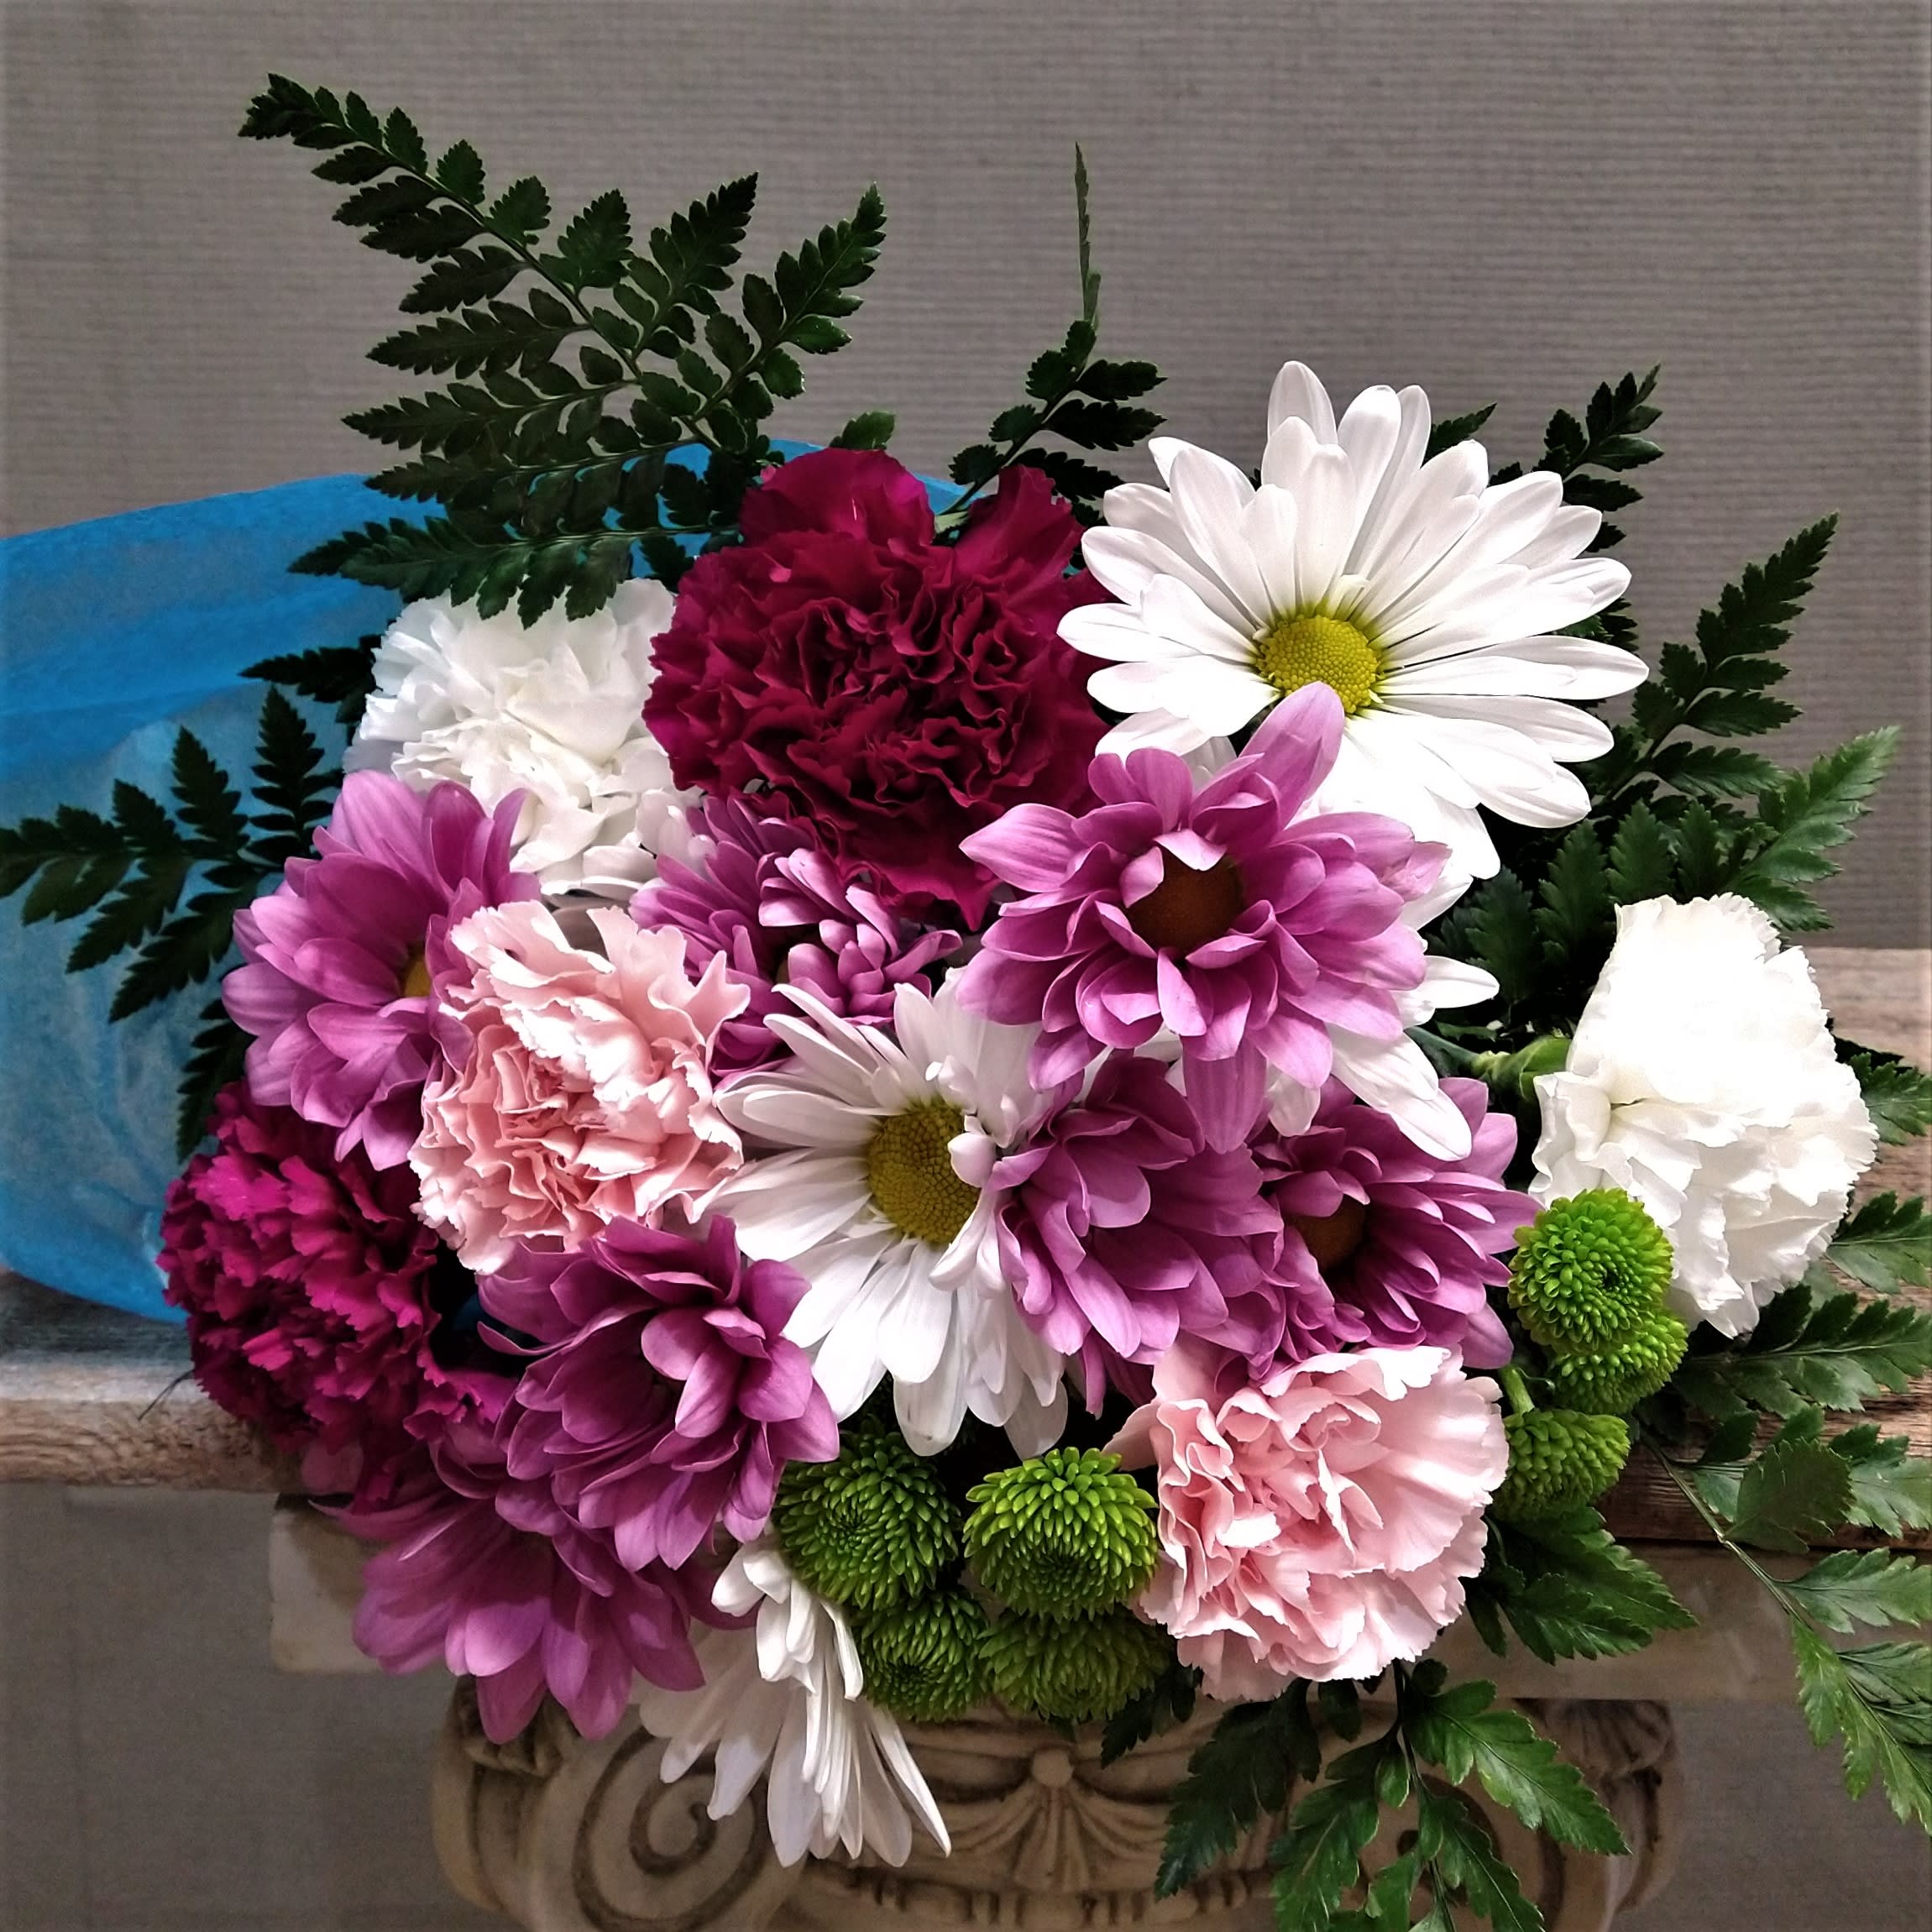 Cupid's Posey - A wrap of long lasting daisies and carns in pink, purple, and white. If you have a different color preference,  please specify in special instruction. For the recipients who already have a vase at home.